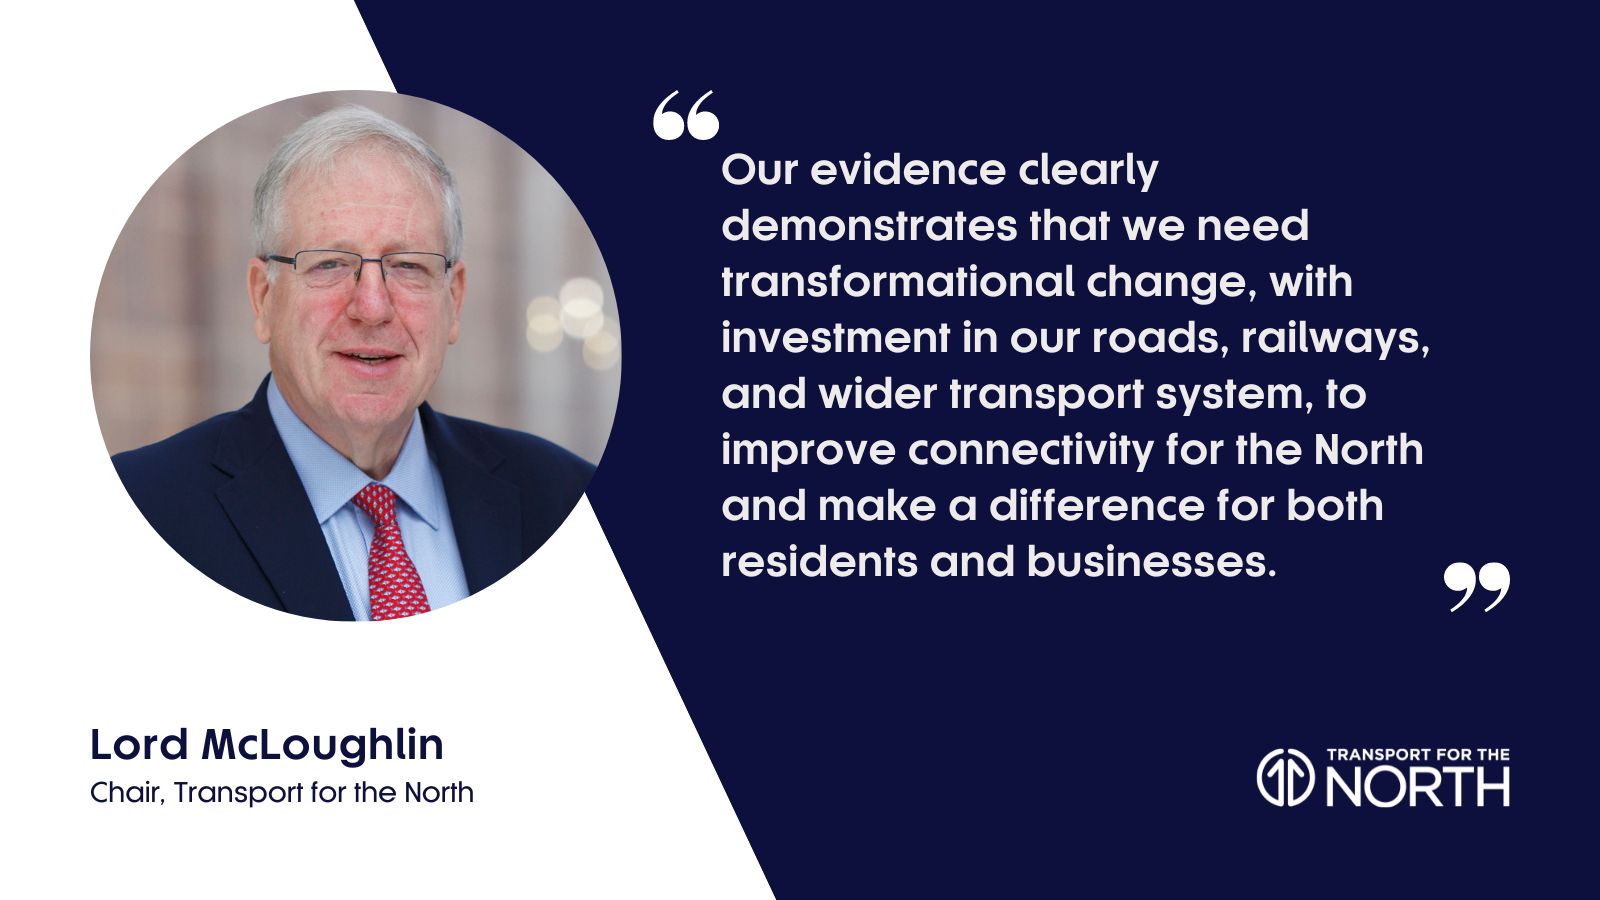 Lord McLoughlin talks about the need for transformational change in the North